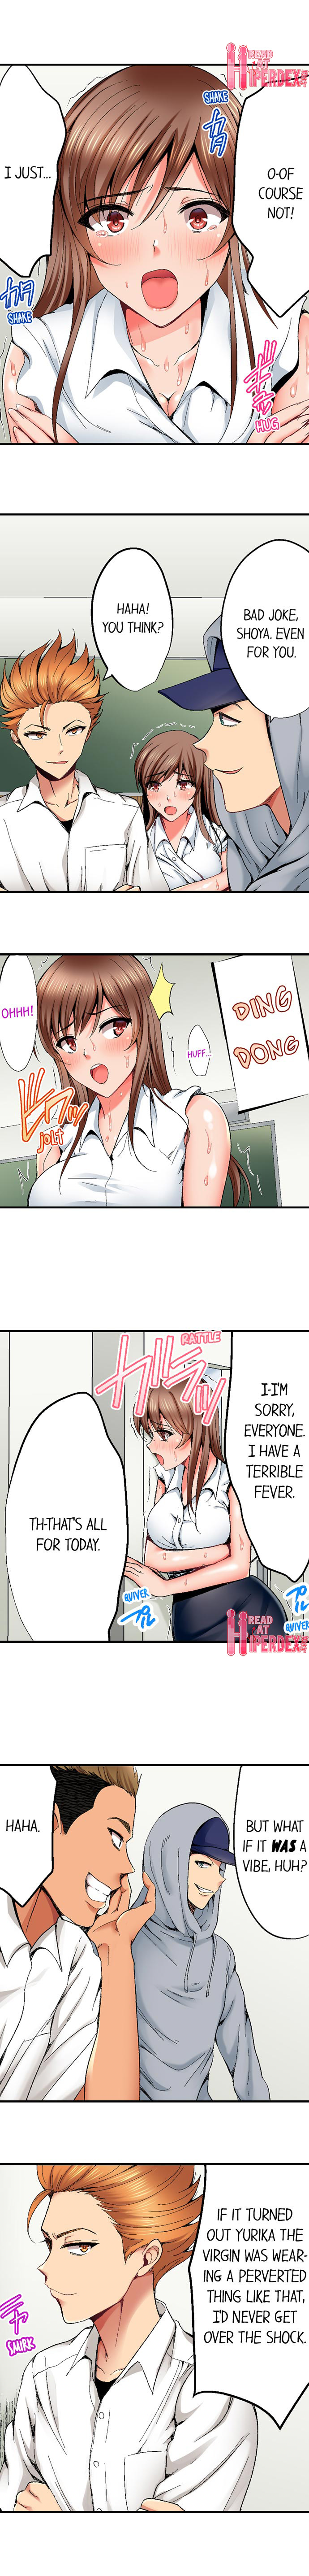 Netorare My Teacher With My Friends - Chapter 8 Page 8